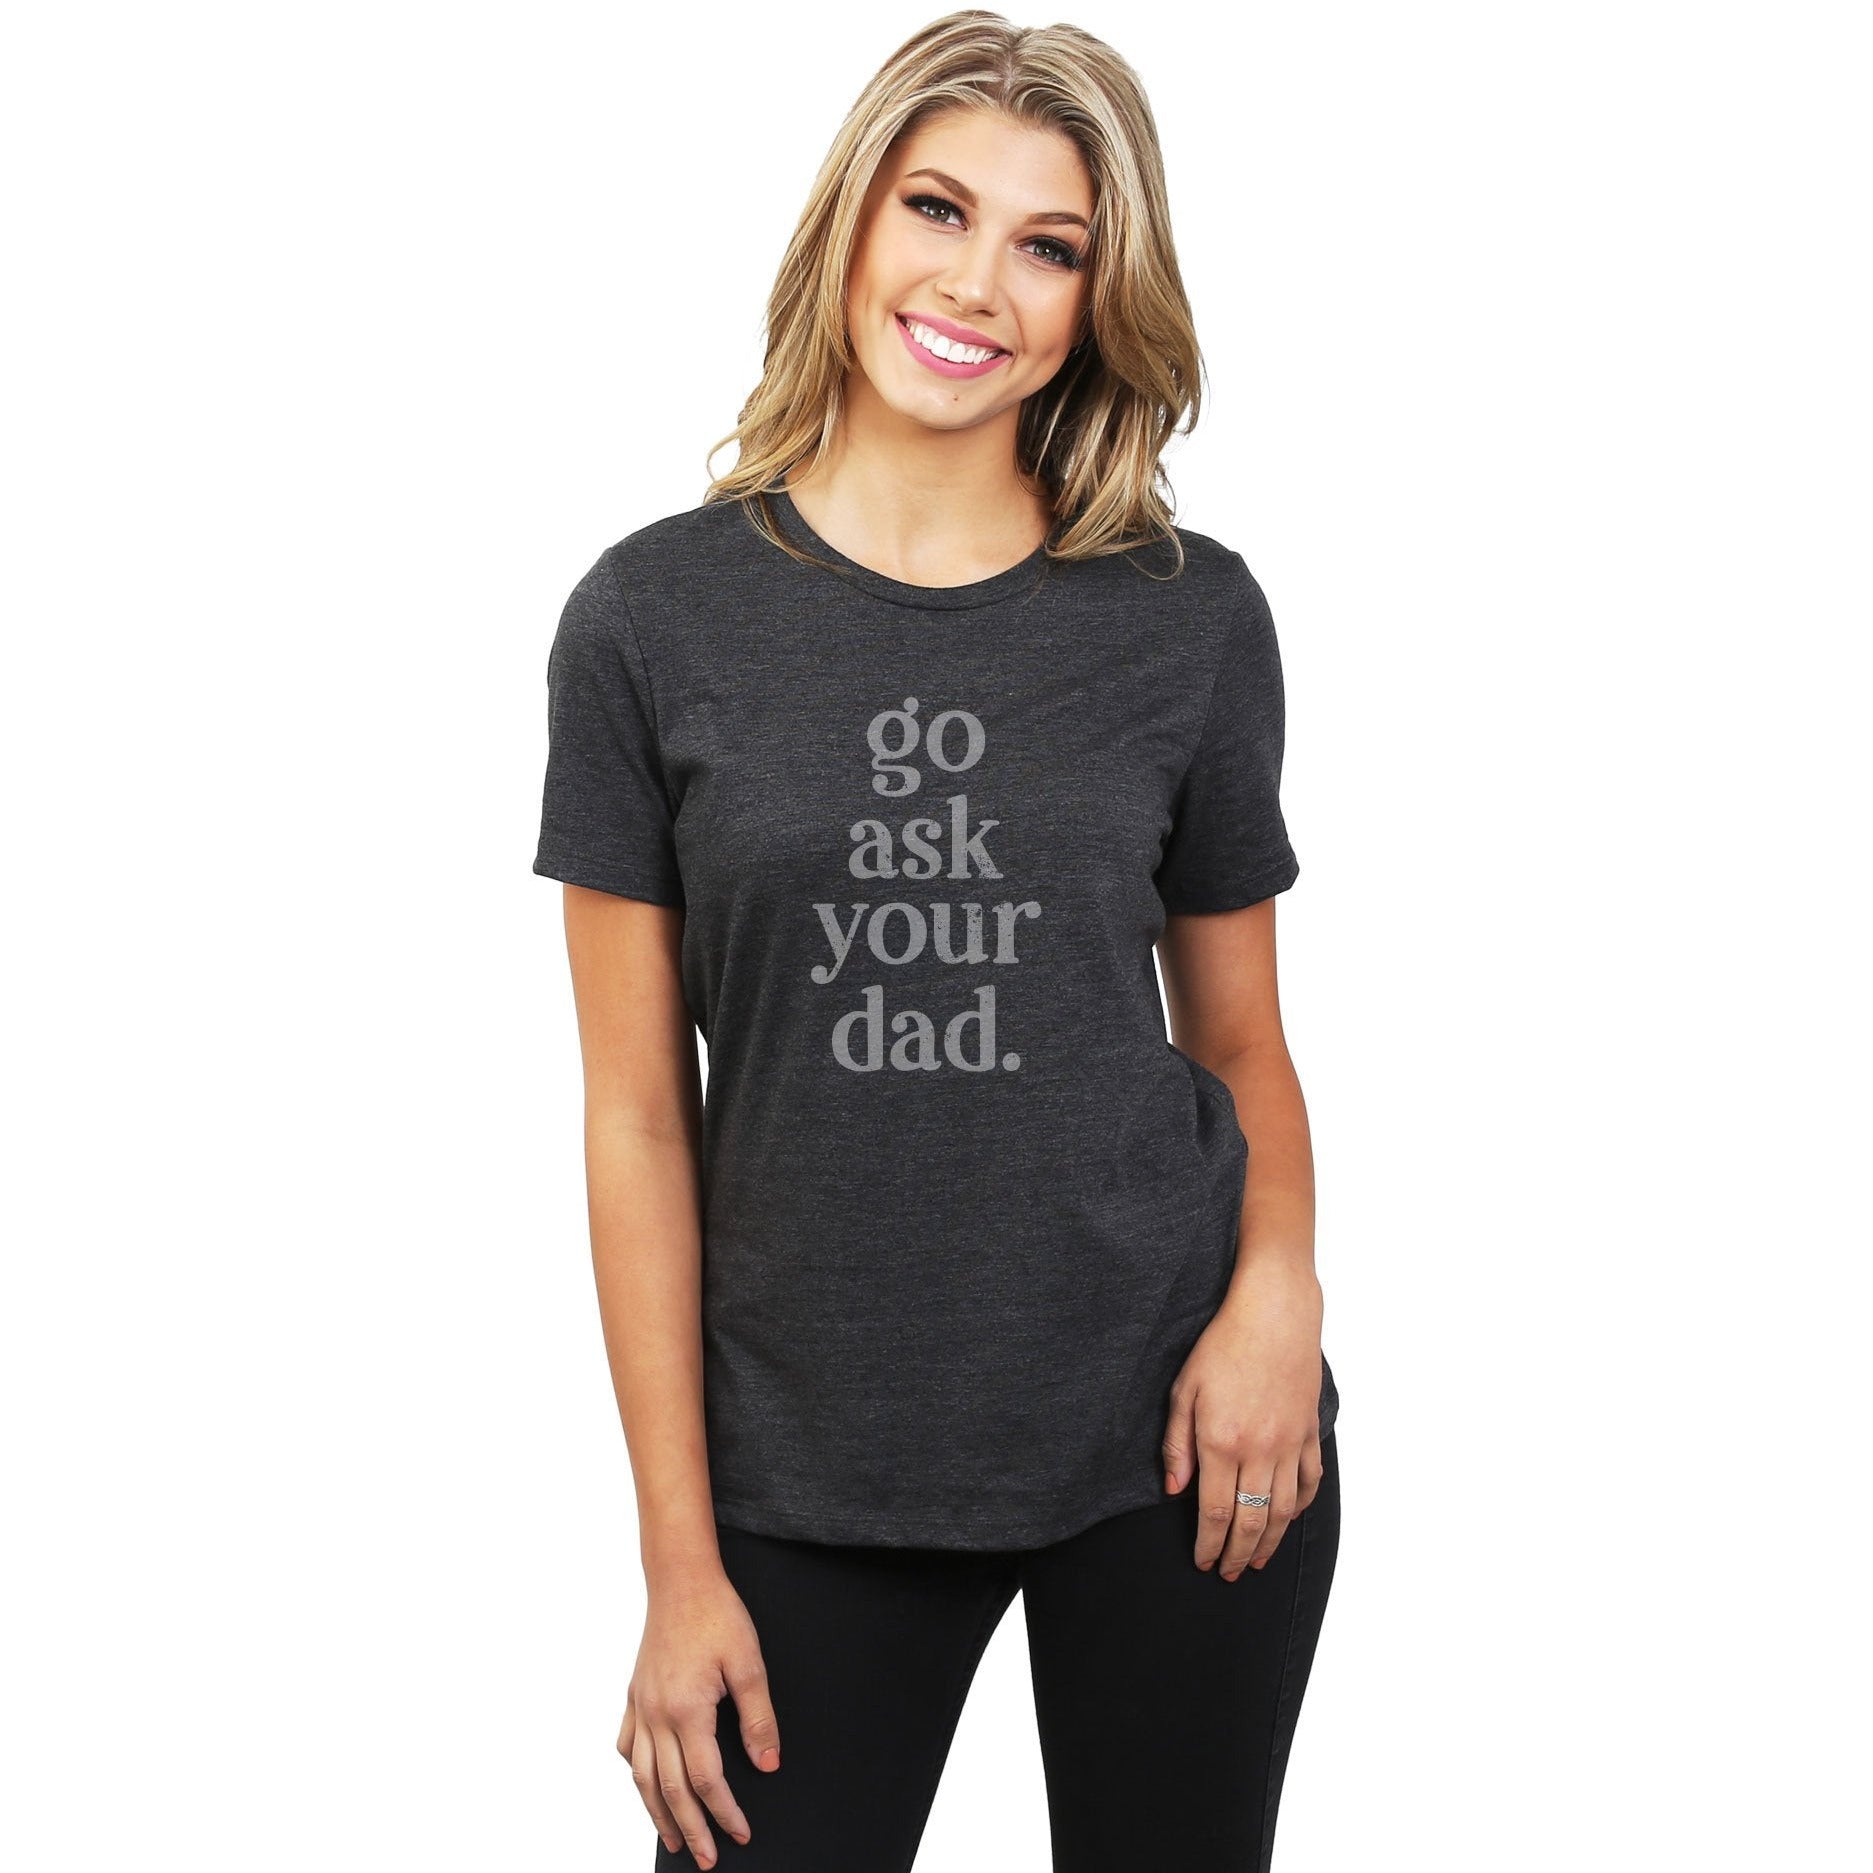 Go Ask Your Dad Women's Relaxed Crewneck T-Shirt Top Tee Charcoal Model
